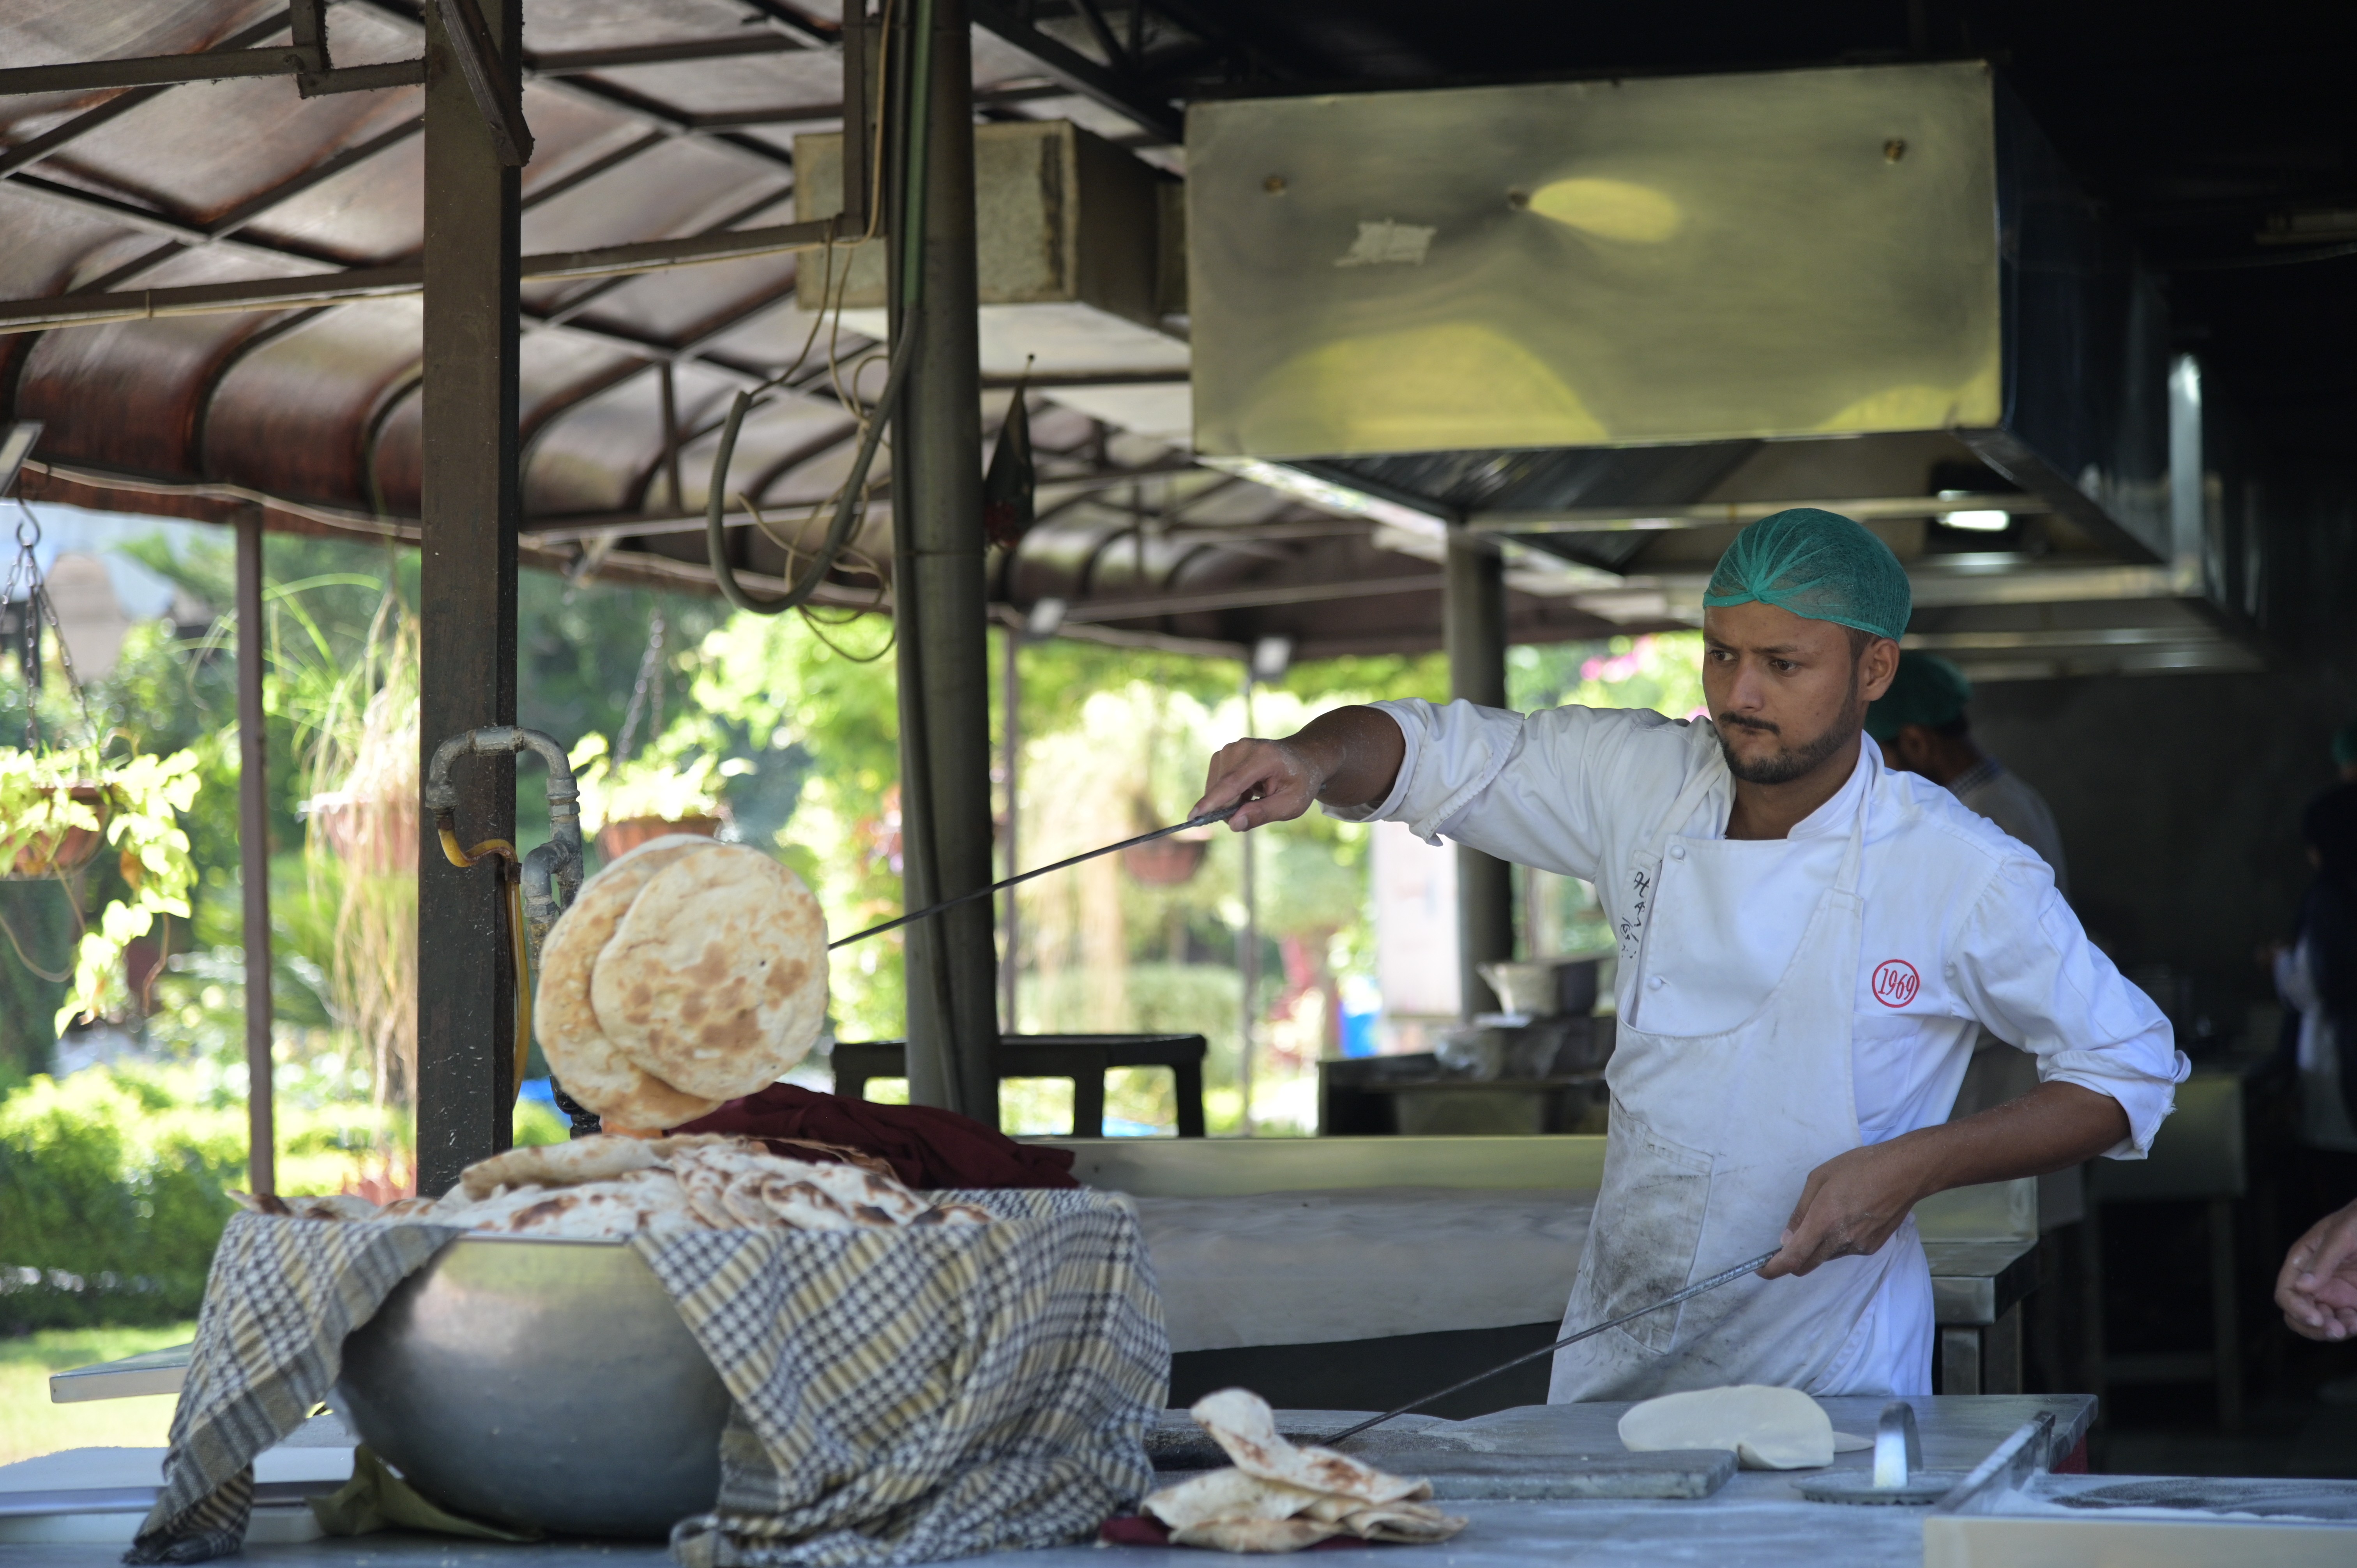 A man making naan (flatbread) which is leavened, oven-baked or tawa-fried.